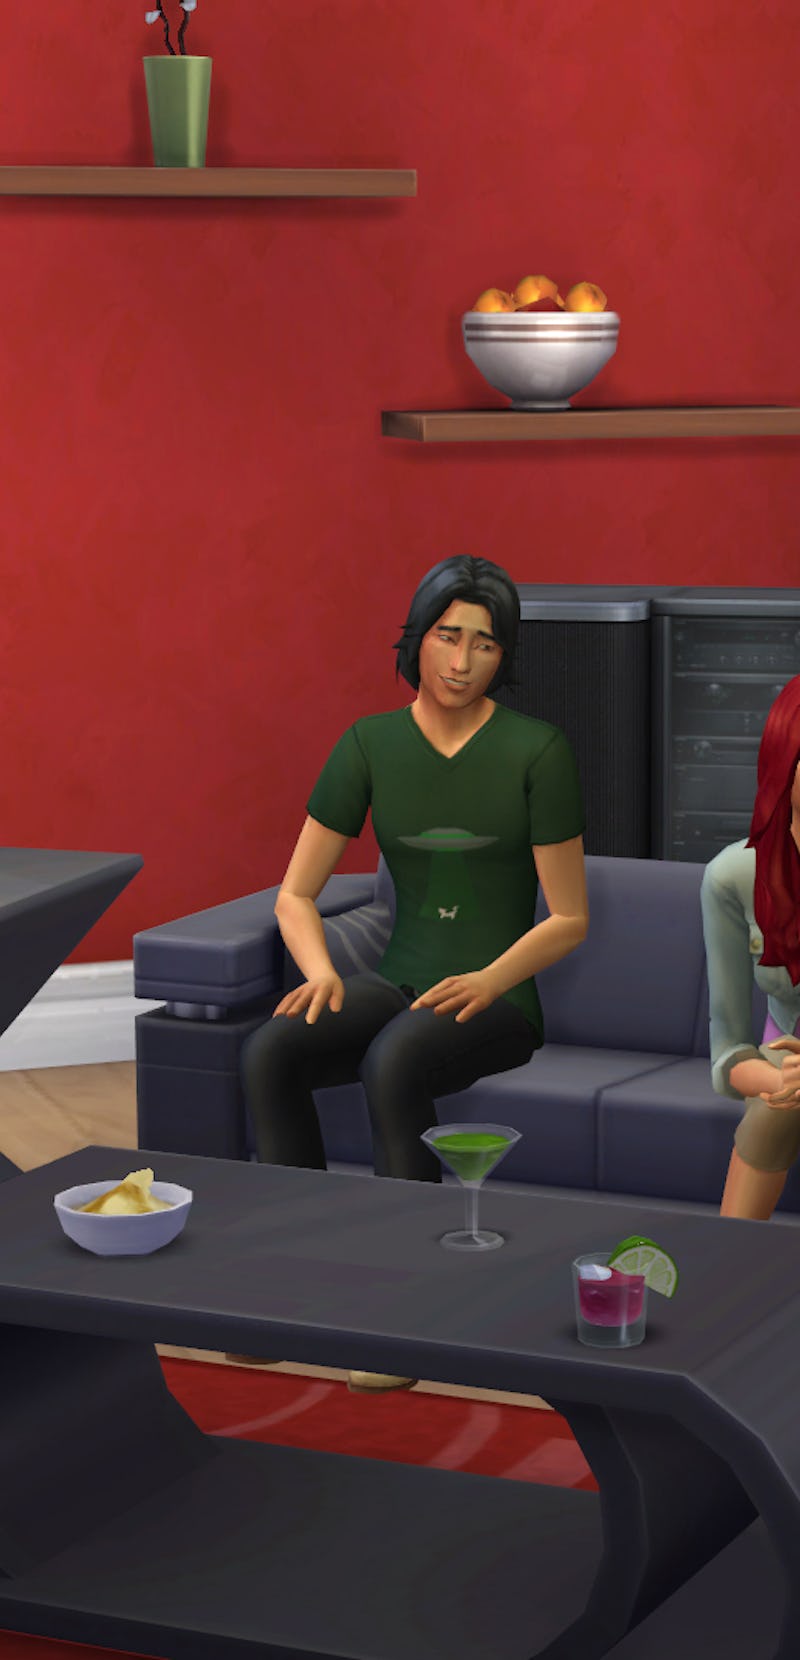 Sims hanging out in living room on couches